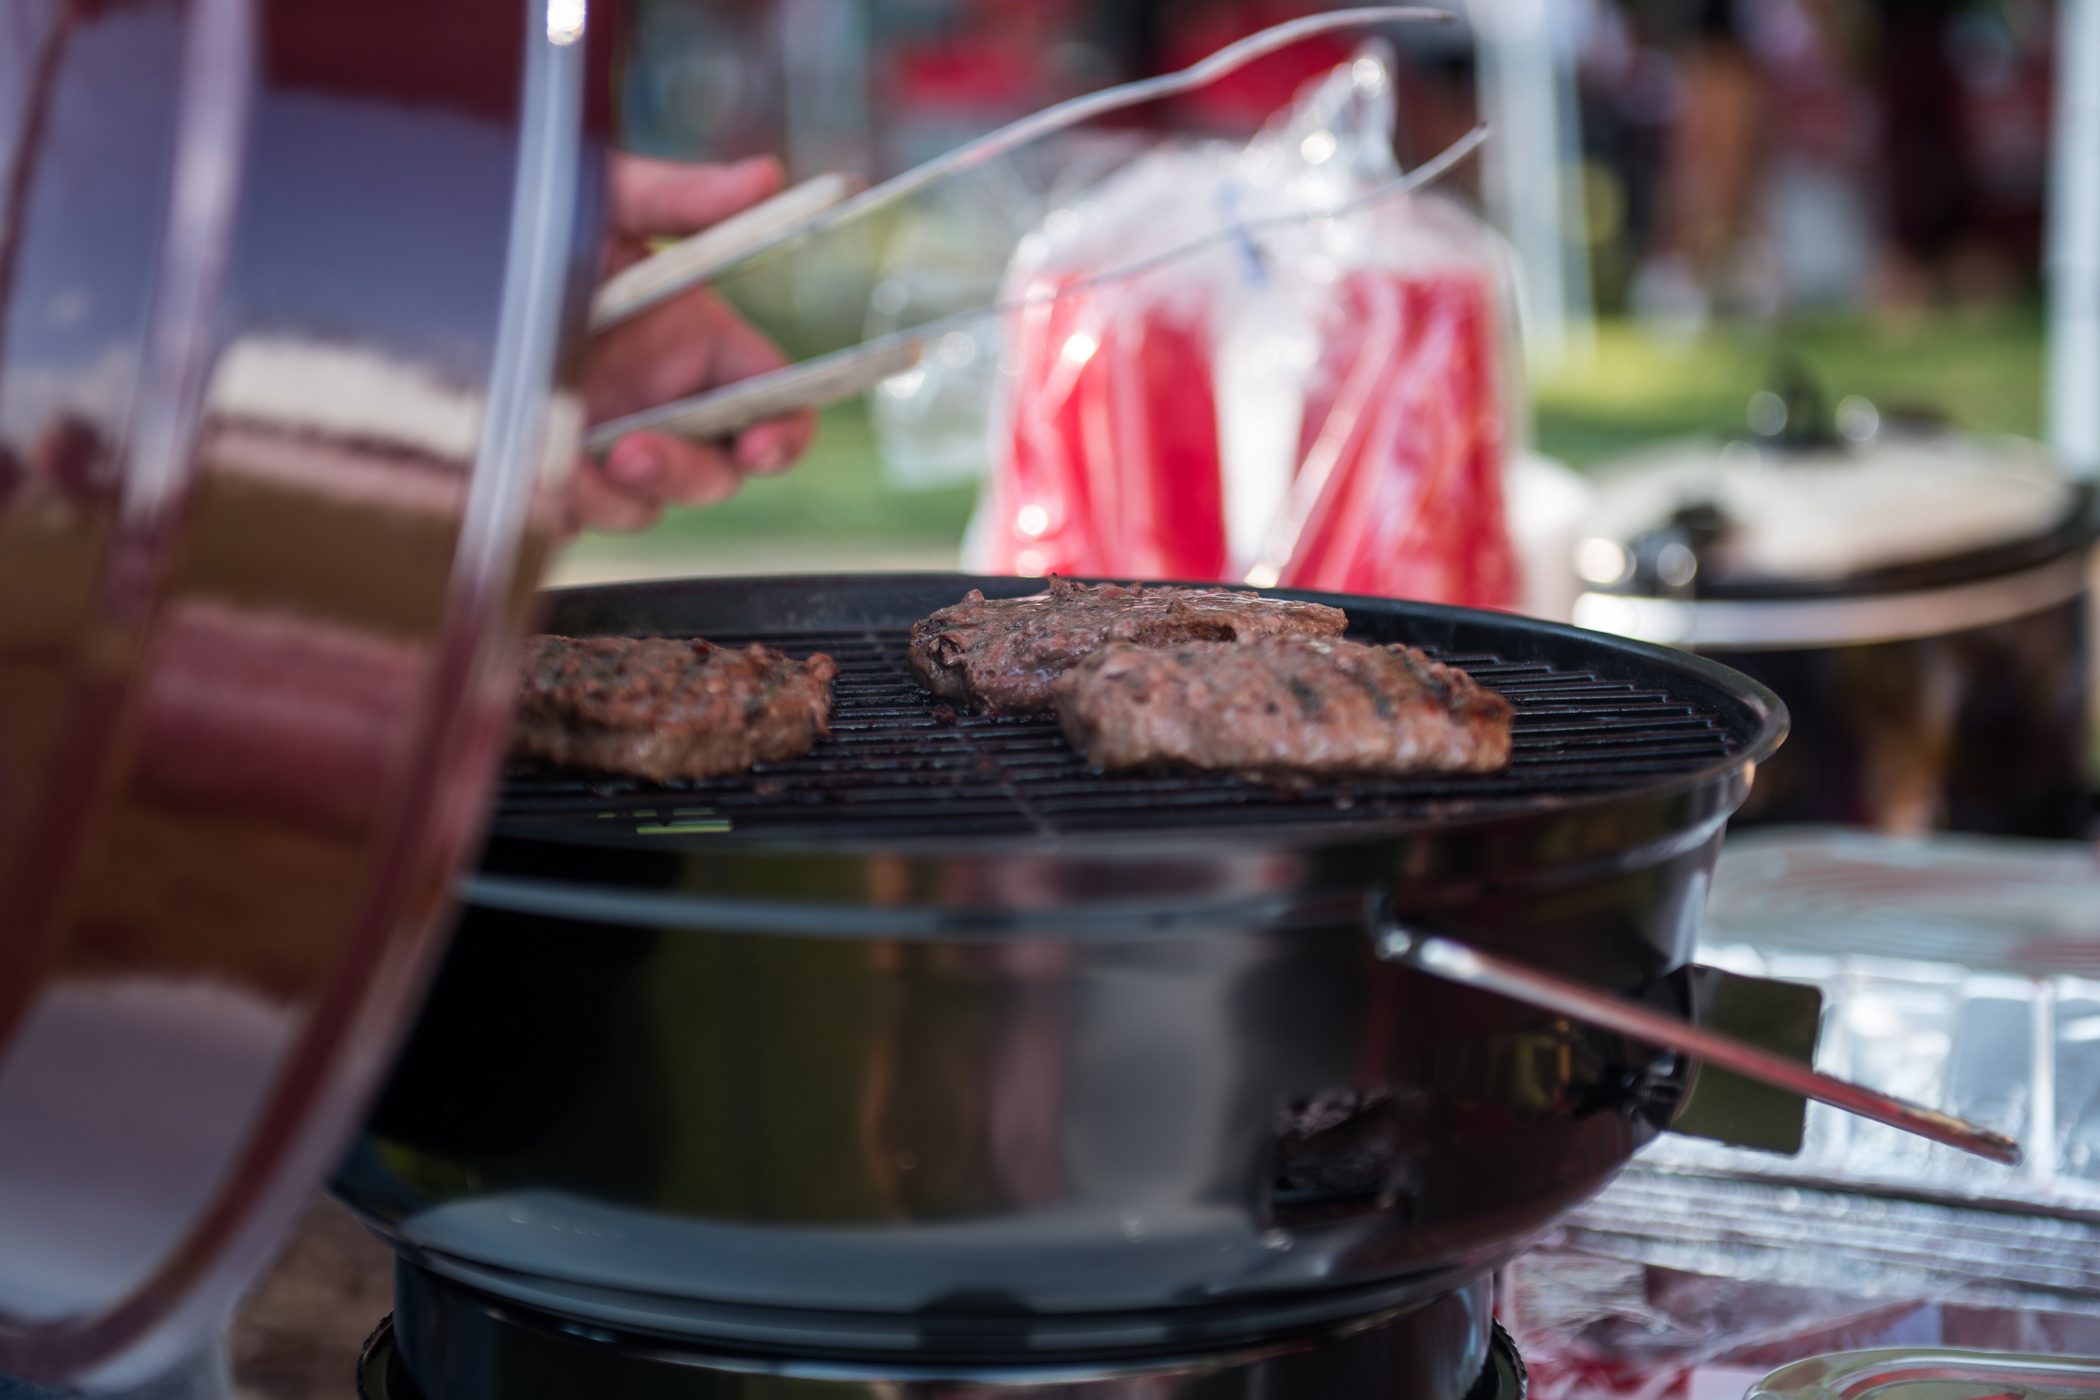 Food Safety Tips for Your July 4 Party